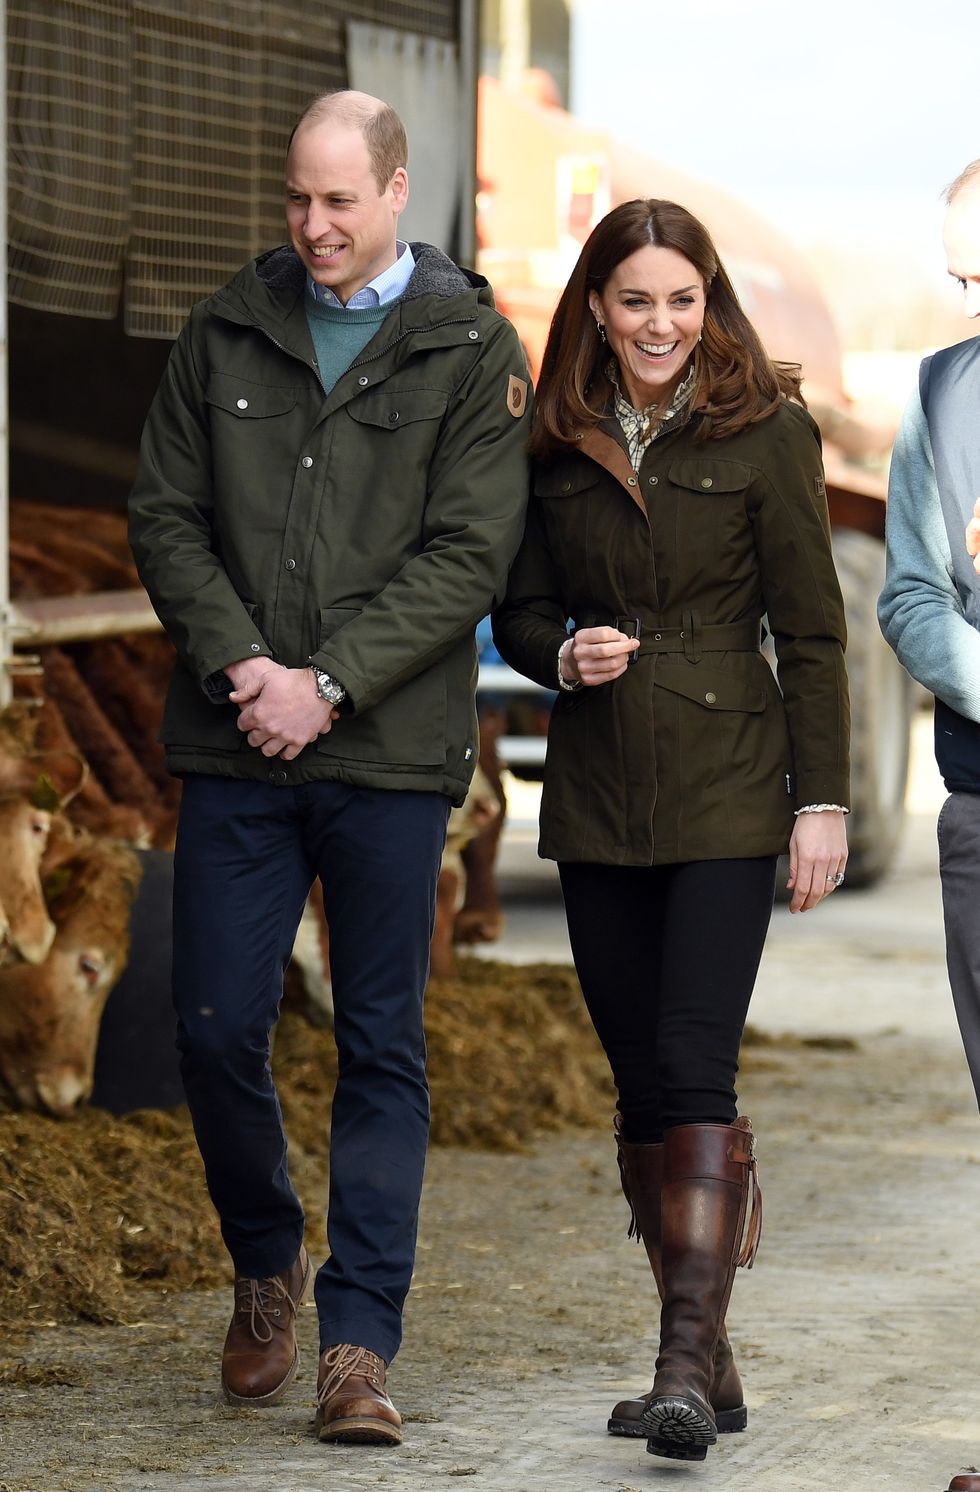 the duke and duchess of cambridge celebrated their ninth wedding anniversary during coronavirus lockdown, here they can be seen walking in ireland in casual attire